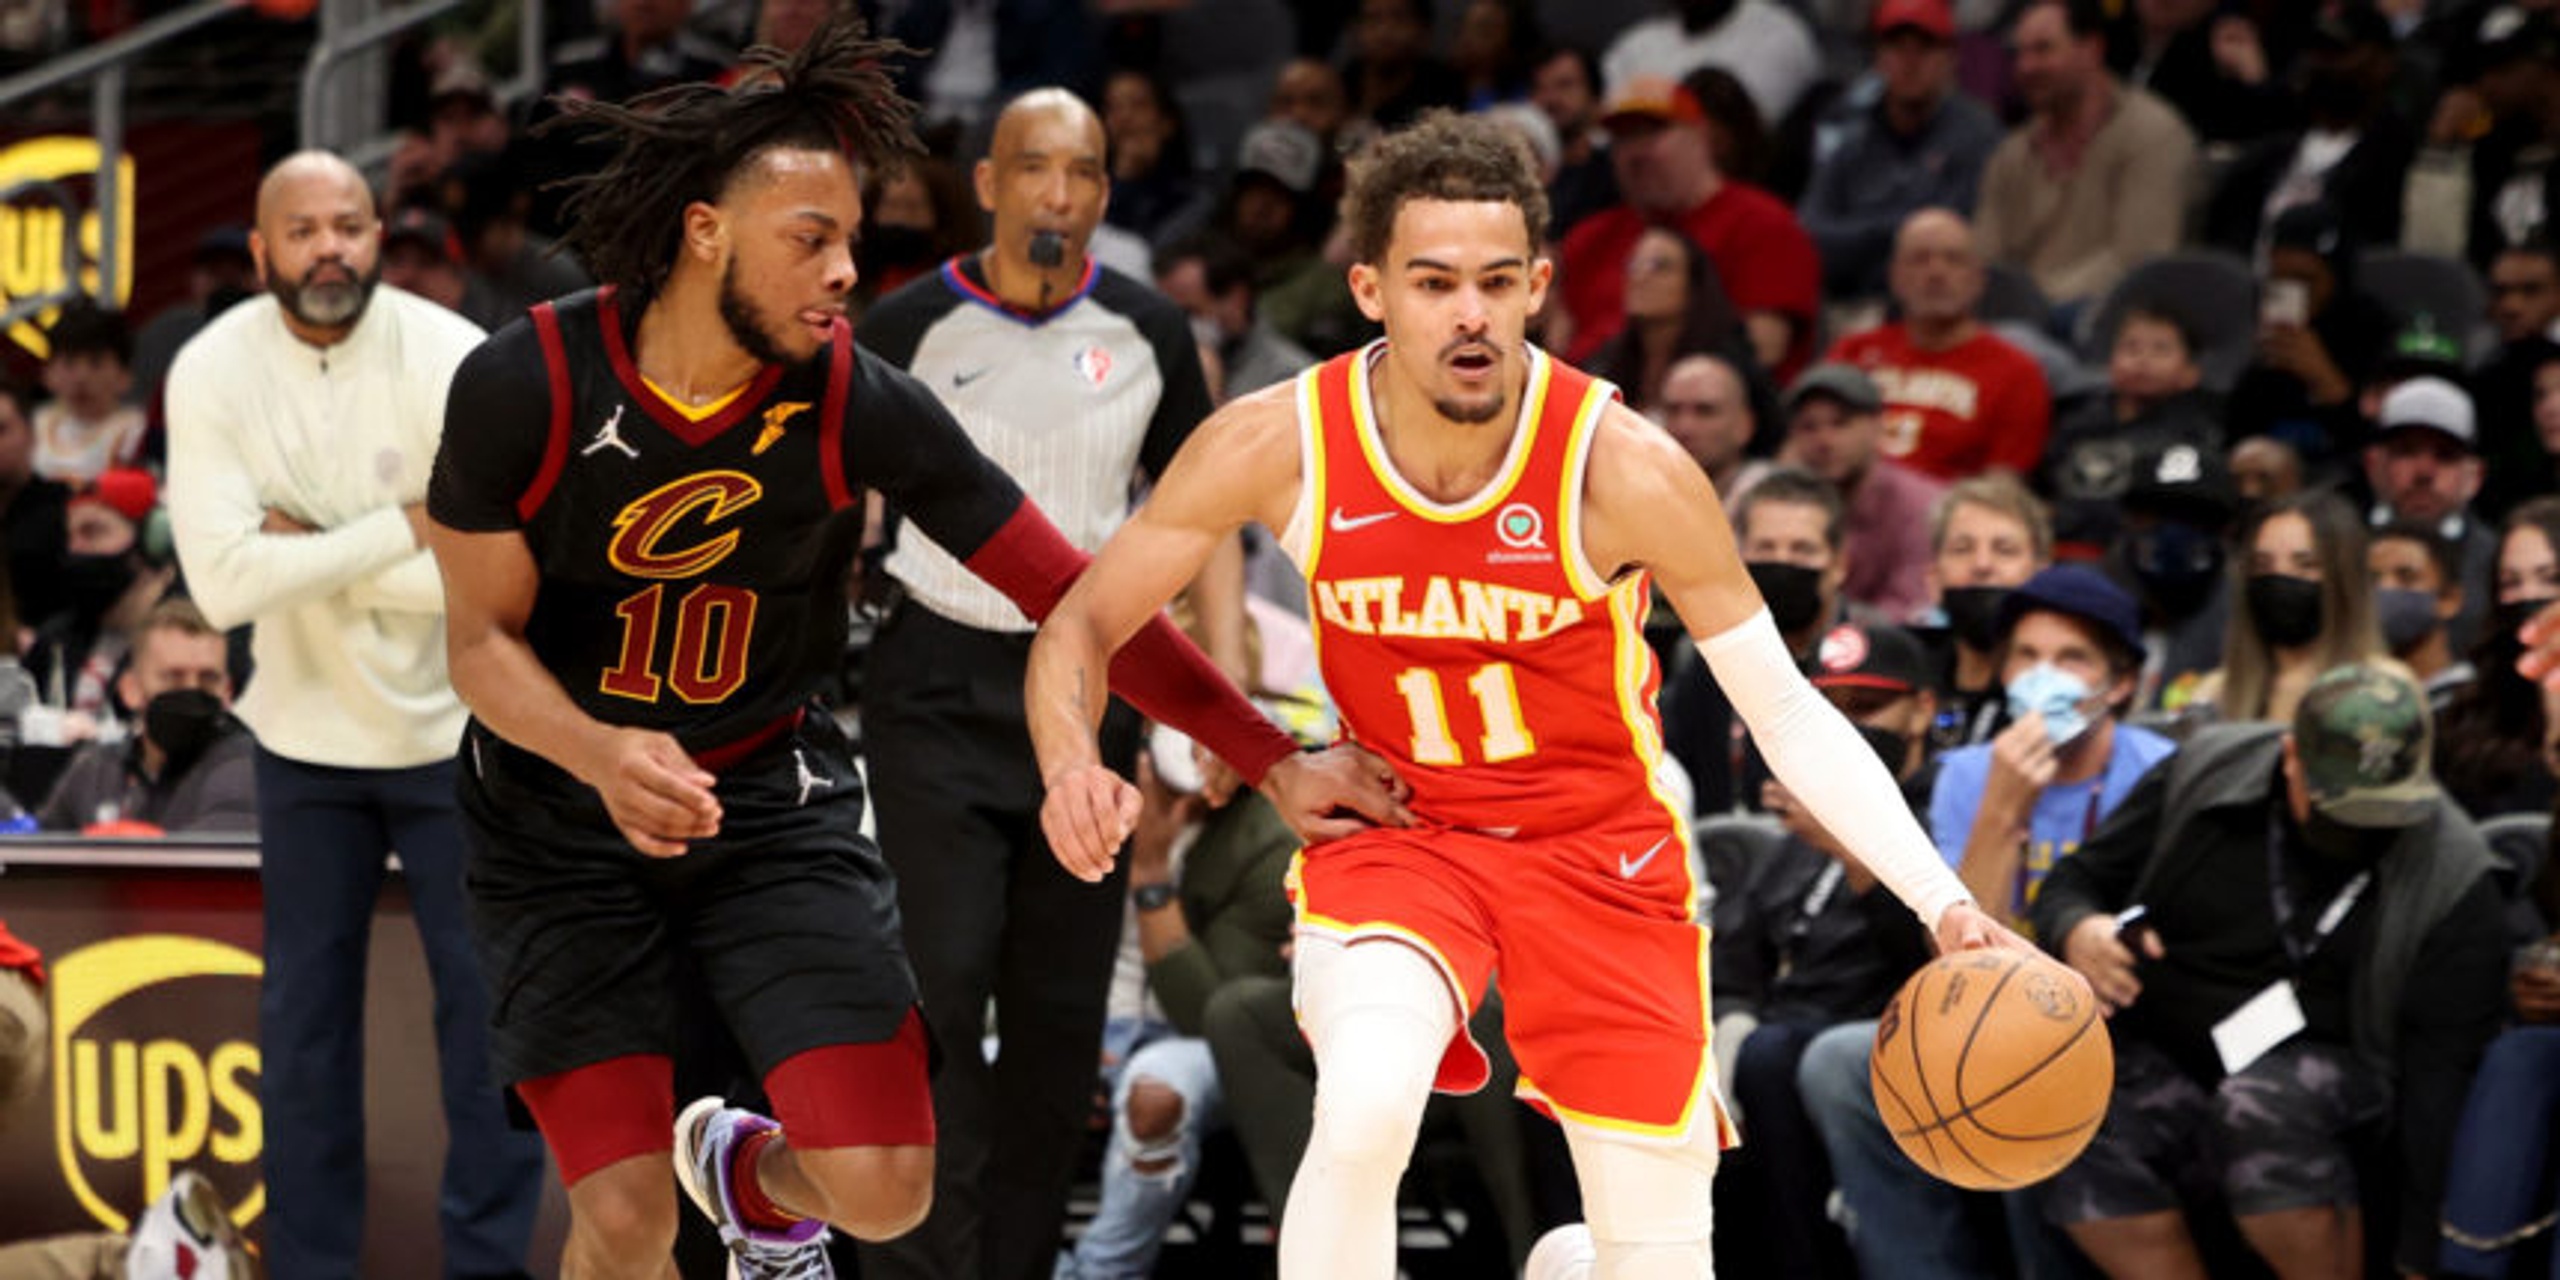 Cavs get second shot at playoffs, must slow Hawks' Young